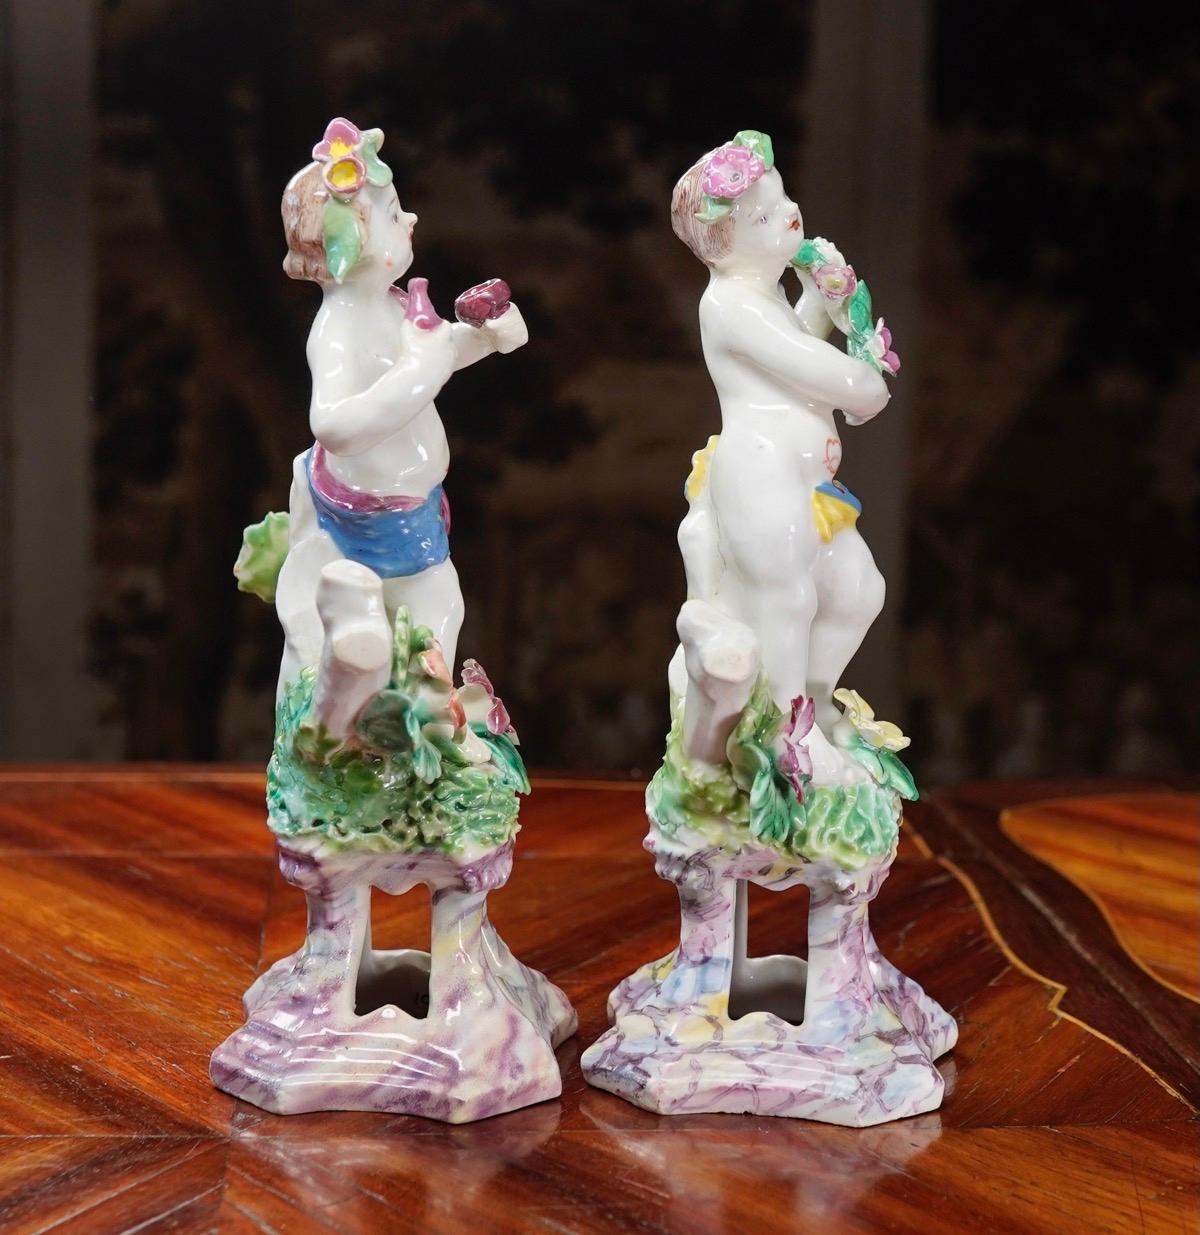 Pair of Bow Cherub Figures on Plinths, Decked with Flowers, circa 1765 For Sale 2